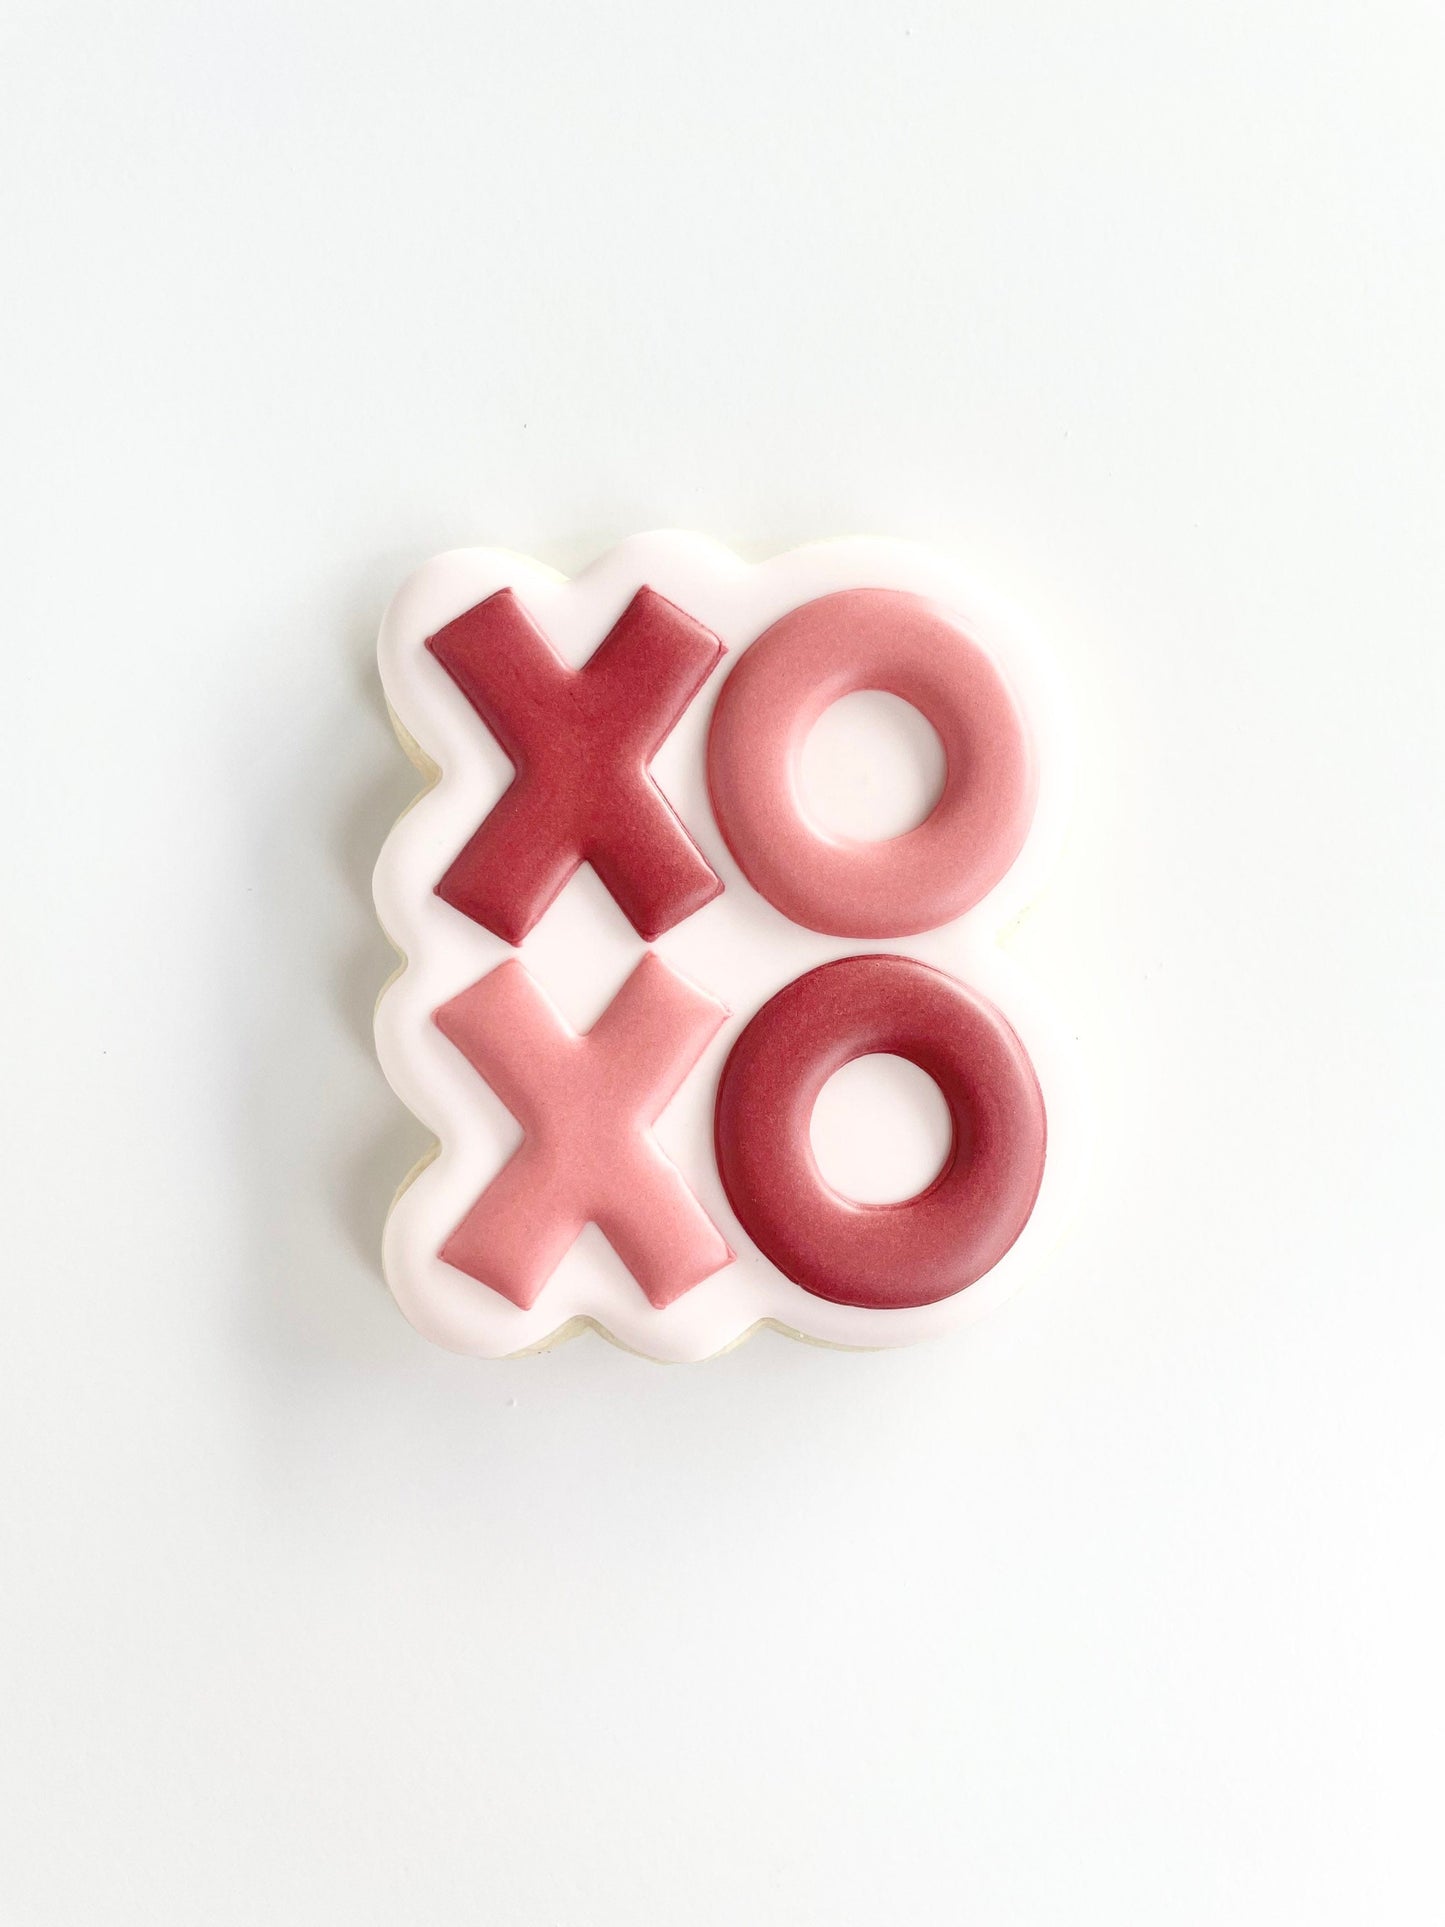 XOXO 2 Cookie Cutter